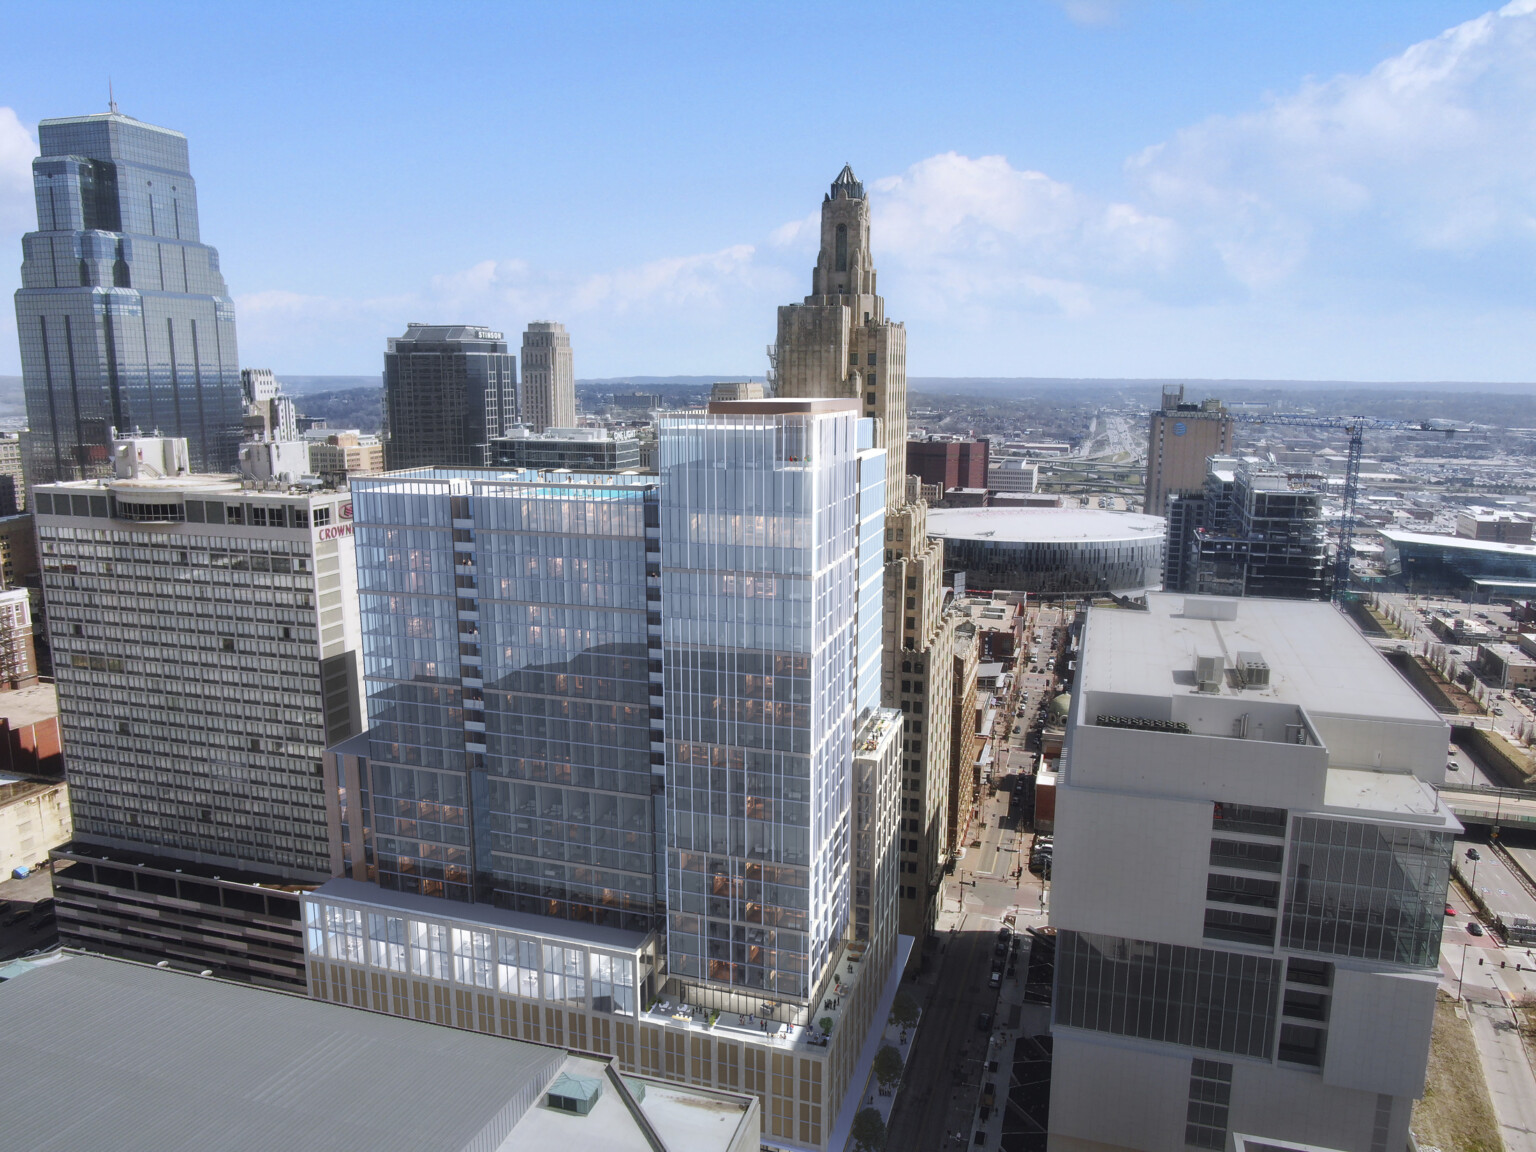 Viewed from backside of new 27-story mixed-use high-rise clad in limestone-colored panels and glass façade